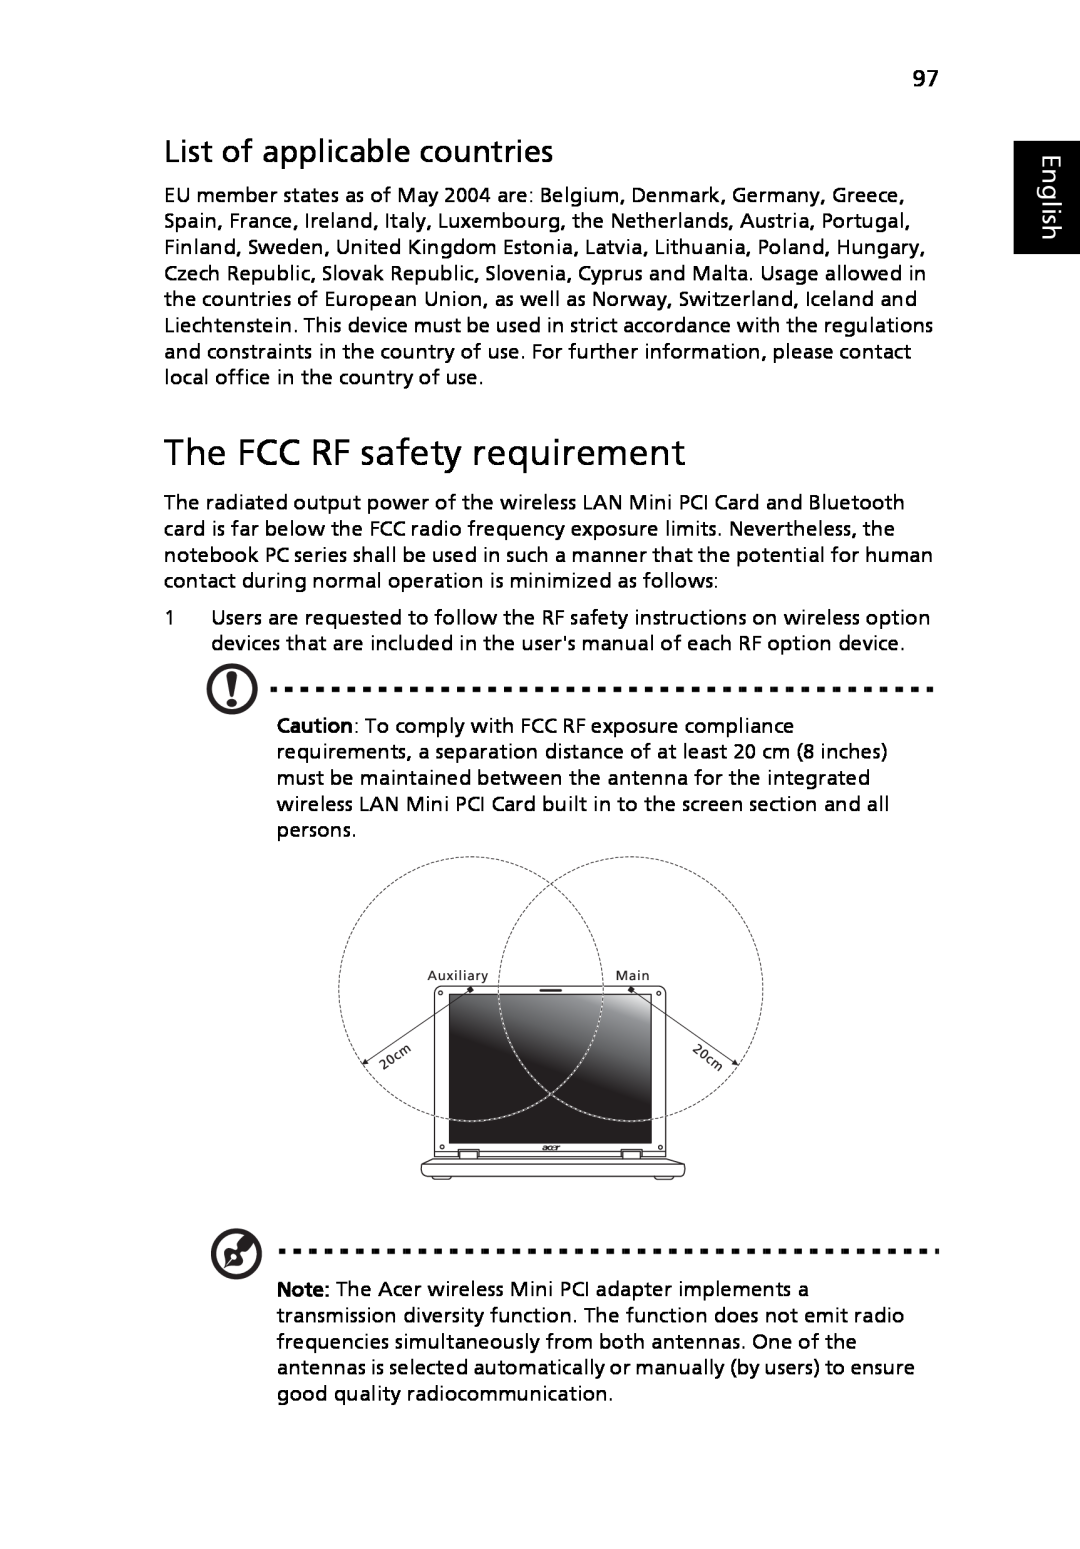 Acer 9120 manual The FCC RF safety requirement, List of applicable countries, English 